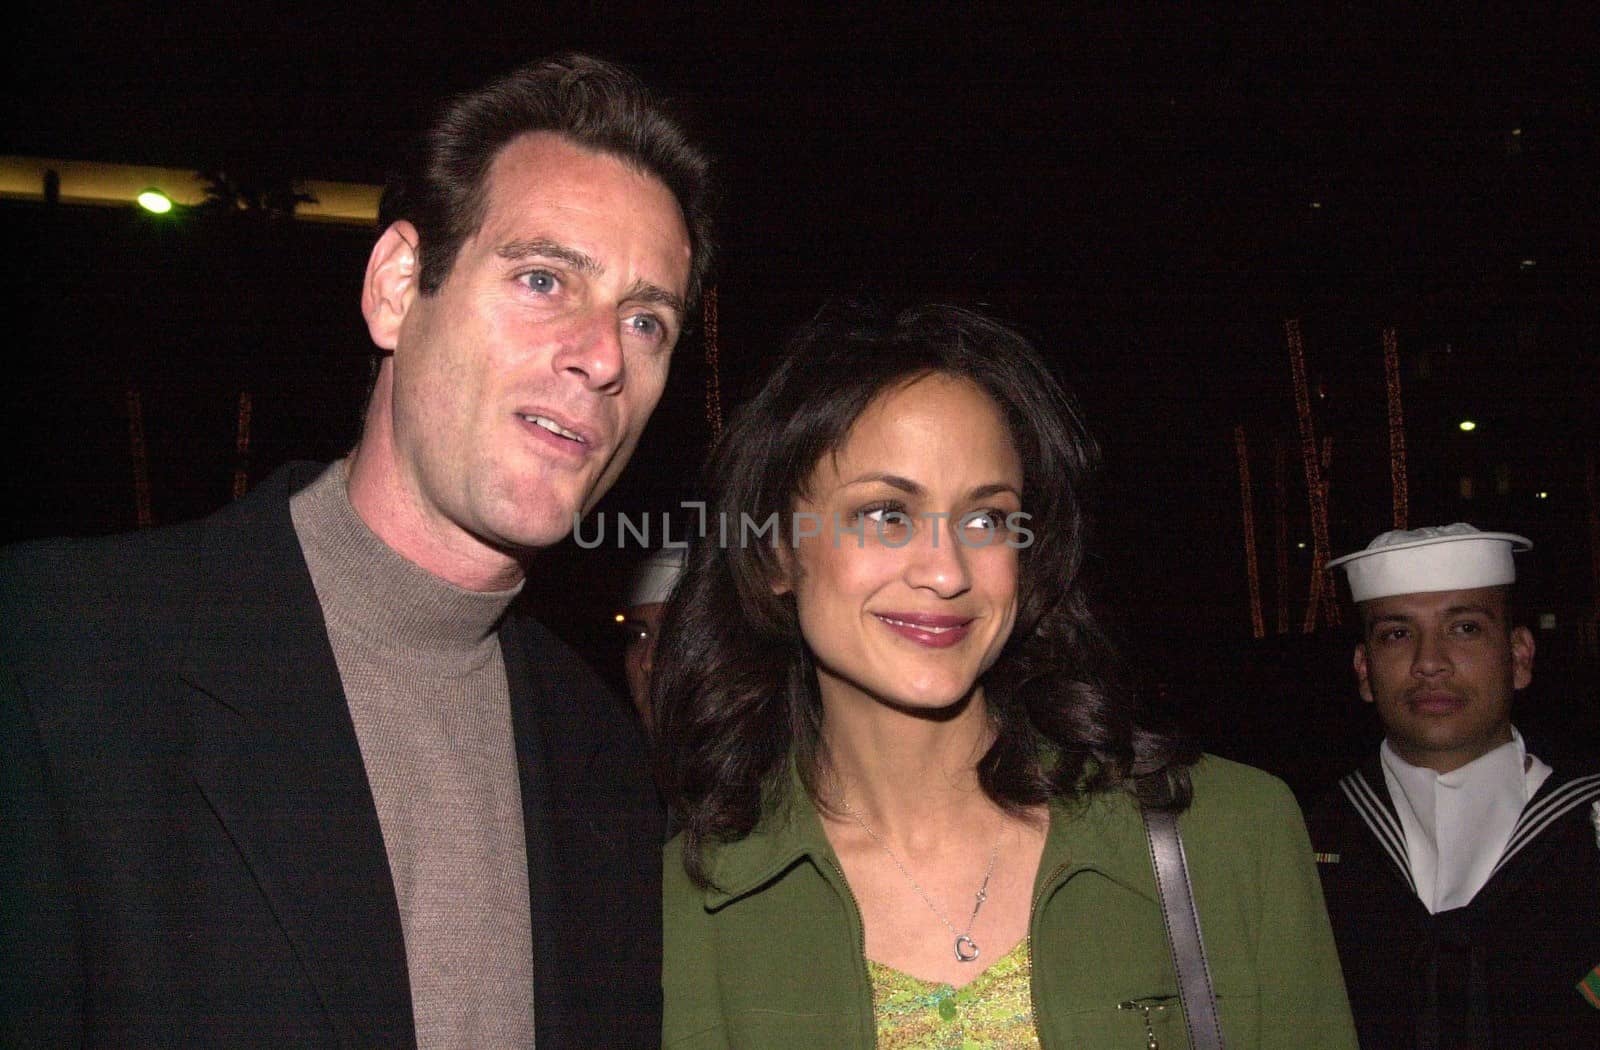 Anne Marie Johnson and husband at the JAG 100th Episode Party, Spago, 02-07-00